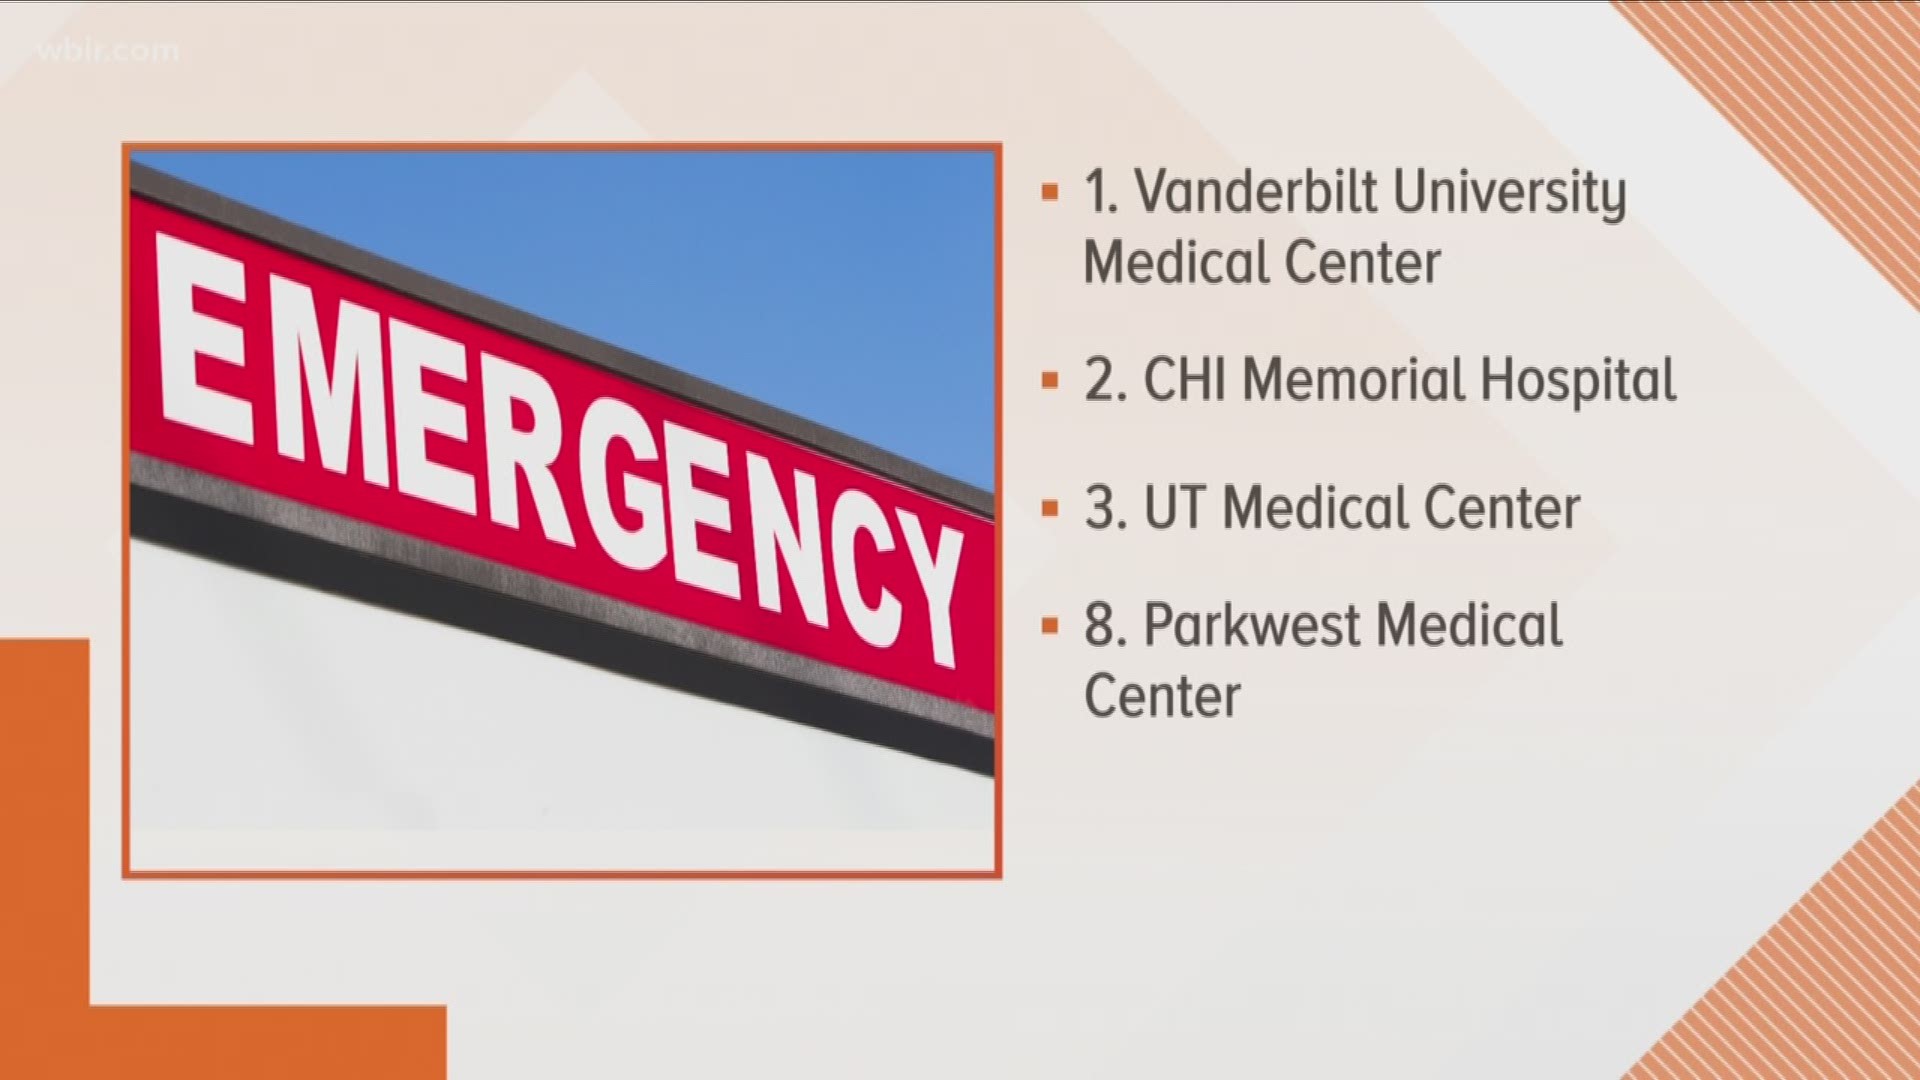 U.S. News and World Report ranks Vanderbilt University Medical Center as the top hospital in the state followed by CHI Memorial Hospital in Chattanooga.